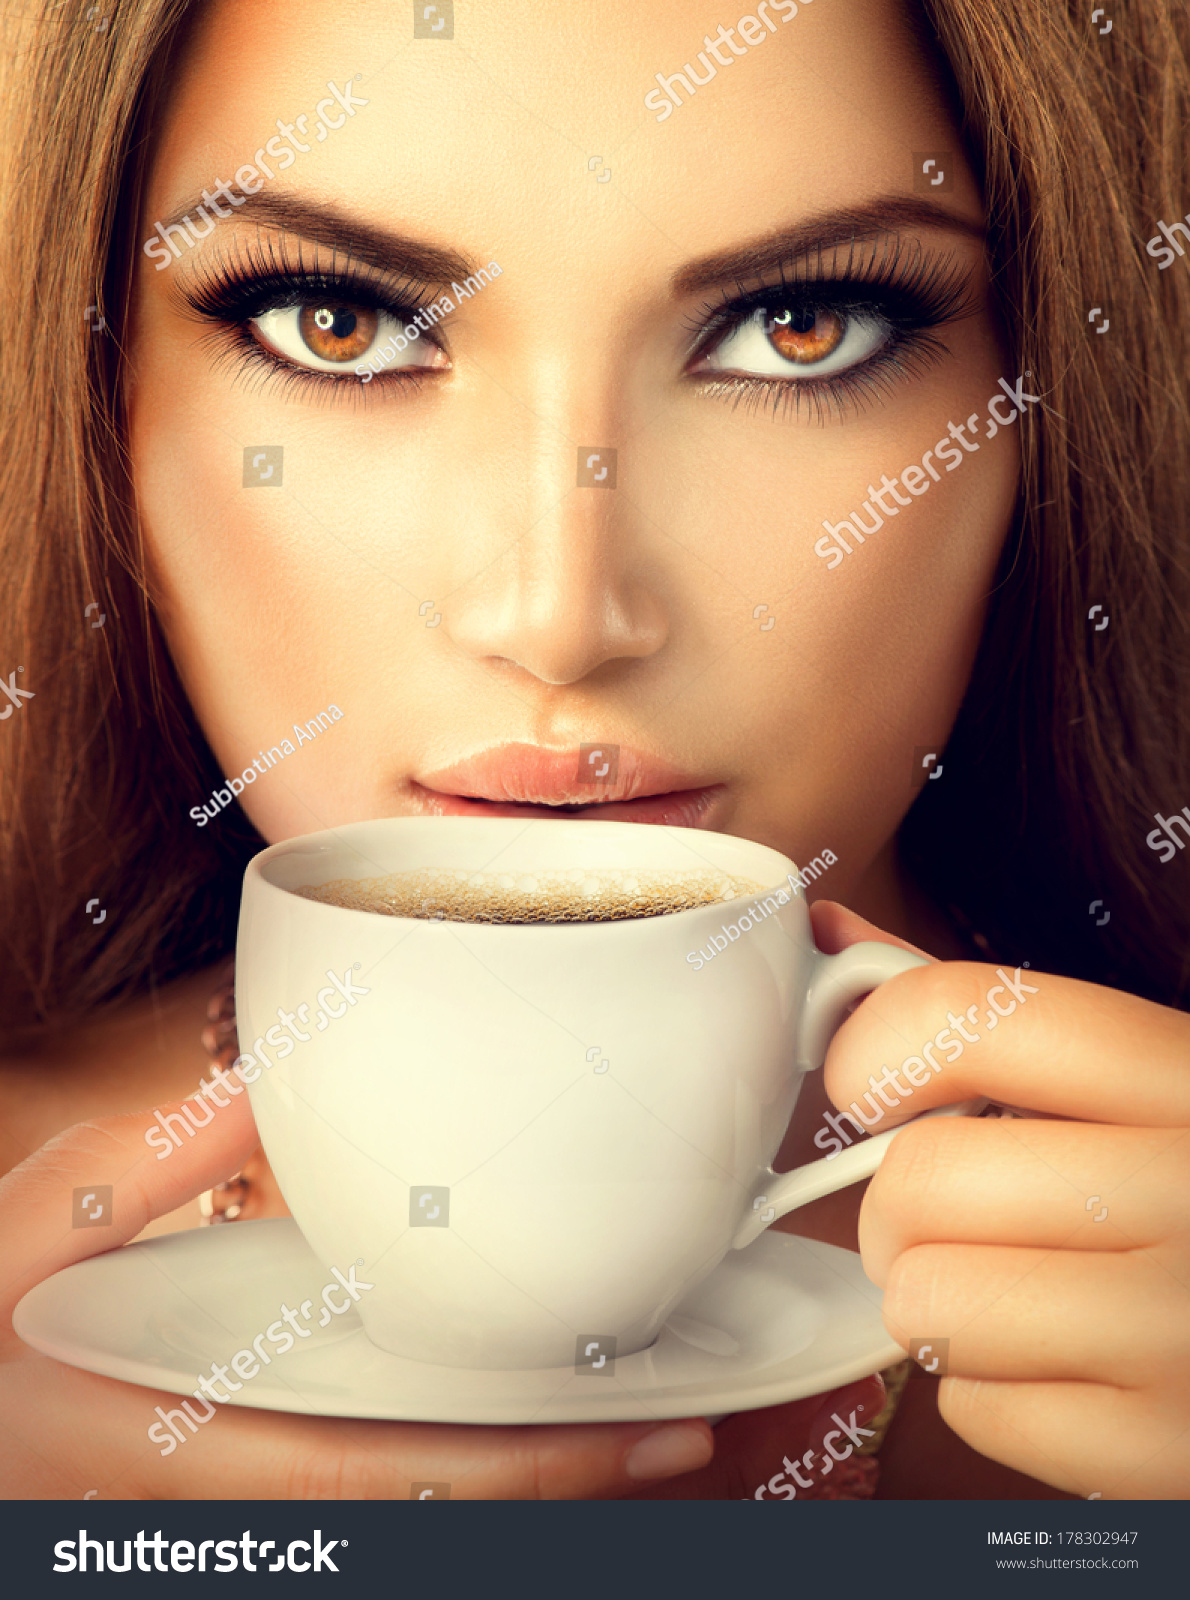 Coffee Beautiful Sexy Girl Drinking Tea Or Coffee Beauty Model Woman With The Cup Of Hot 